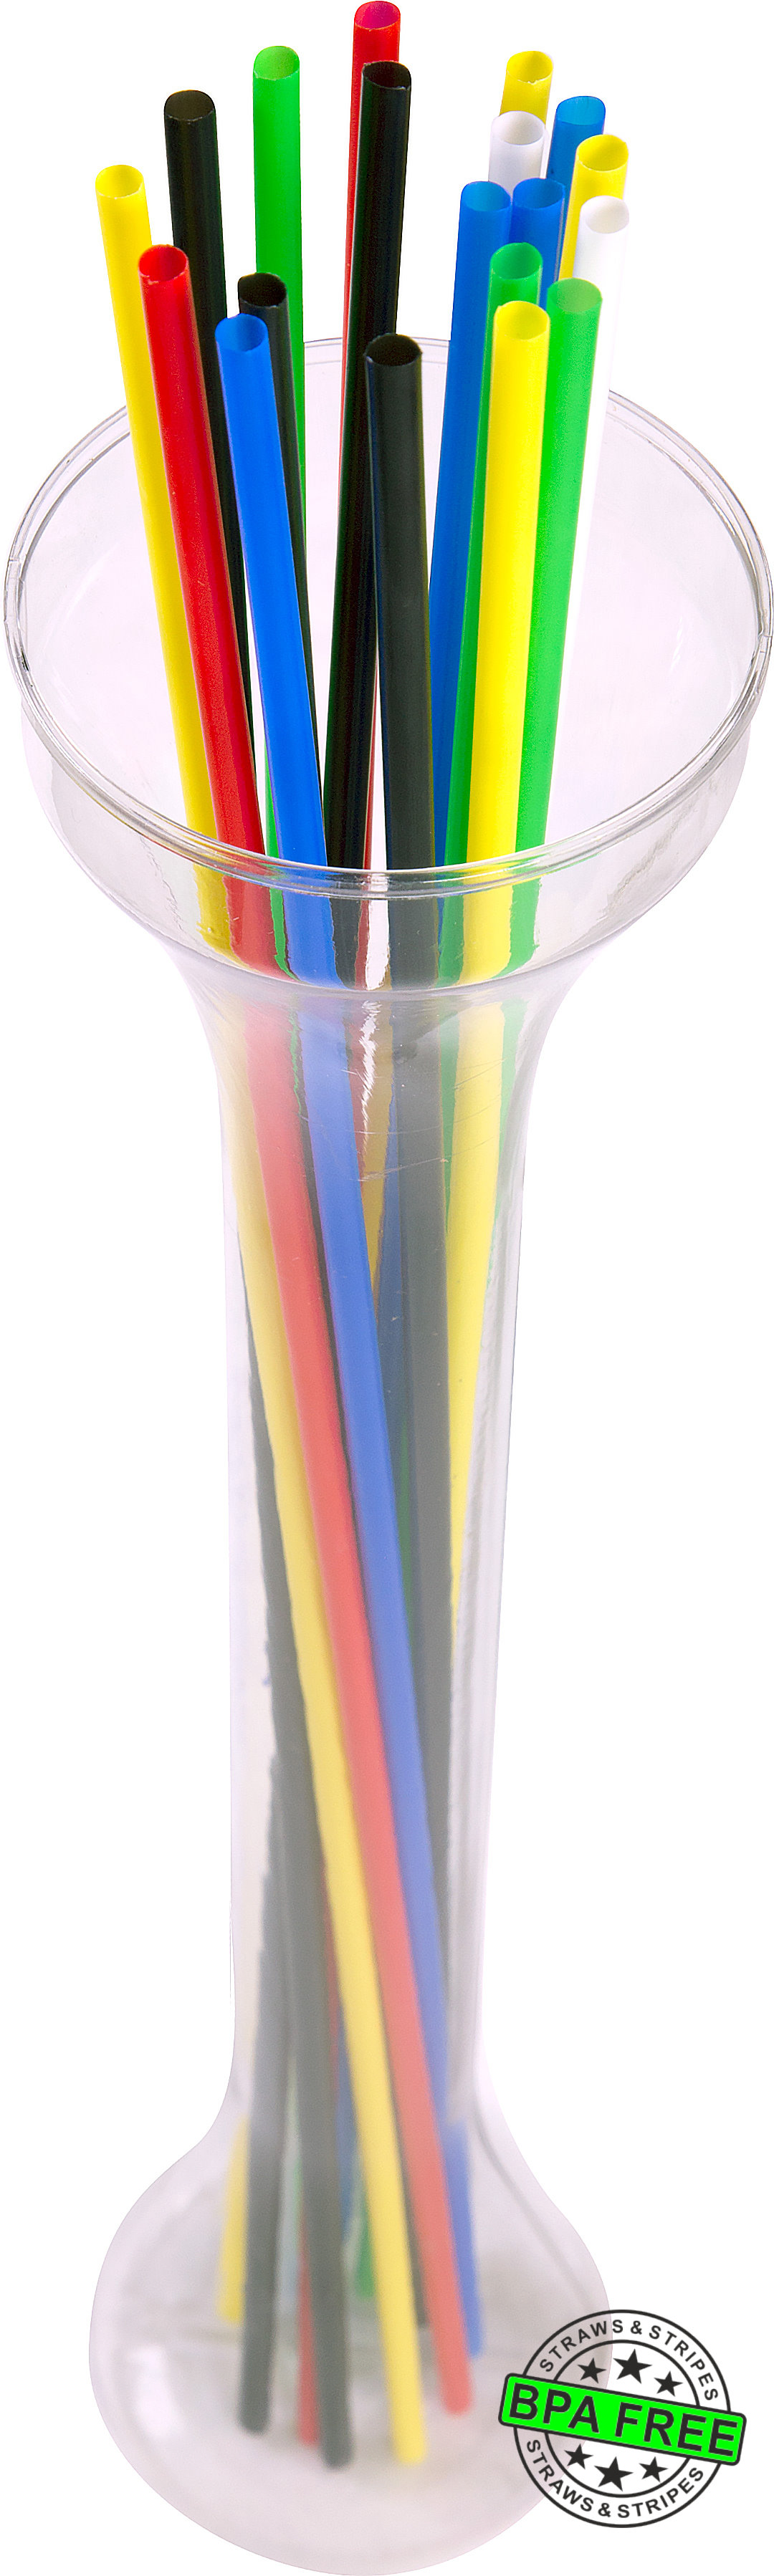 1 CASE - 3,500 (35x100) EXTRA LONG drinking straws 18.00 x 0.21 inch - color: mixed color